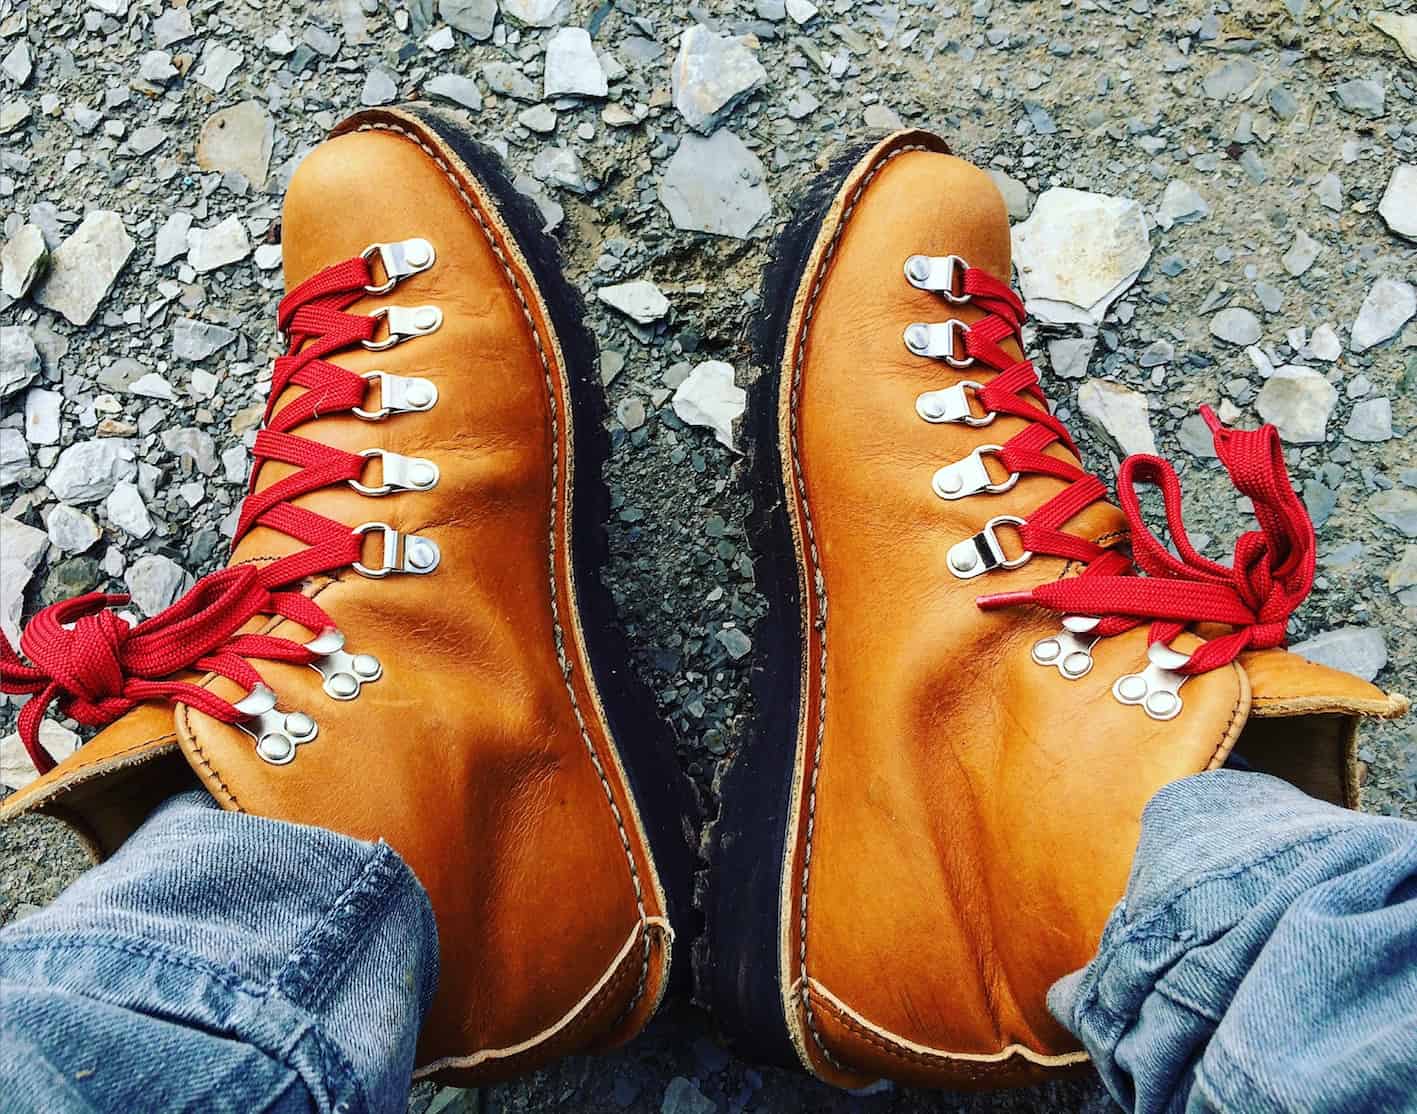 rocking red laces on Danner's traditional classic women's hiking boot